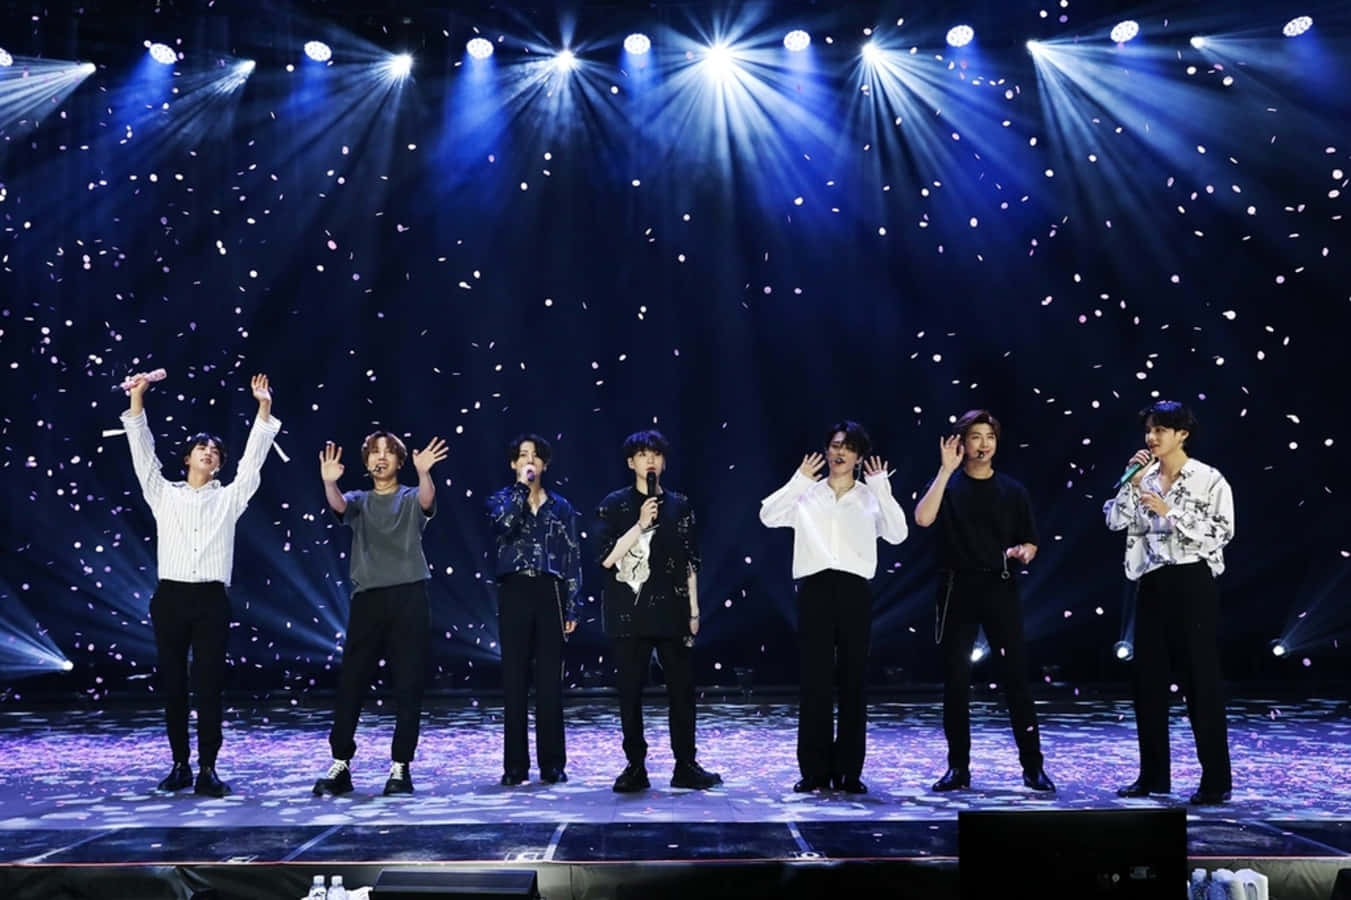 BTS performing live on stage in a dynamic concert Wallpaper